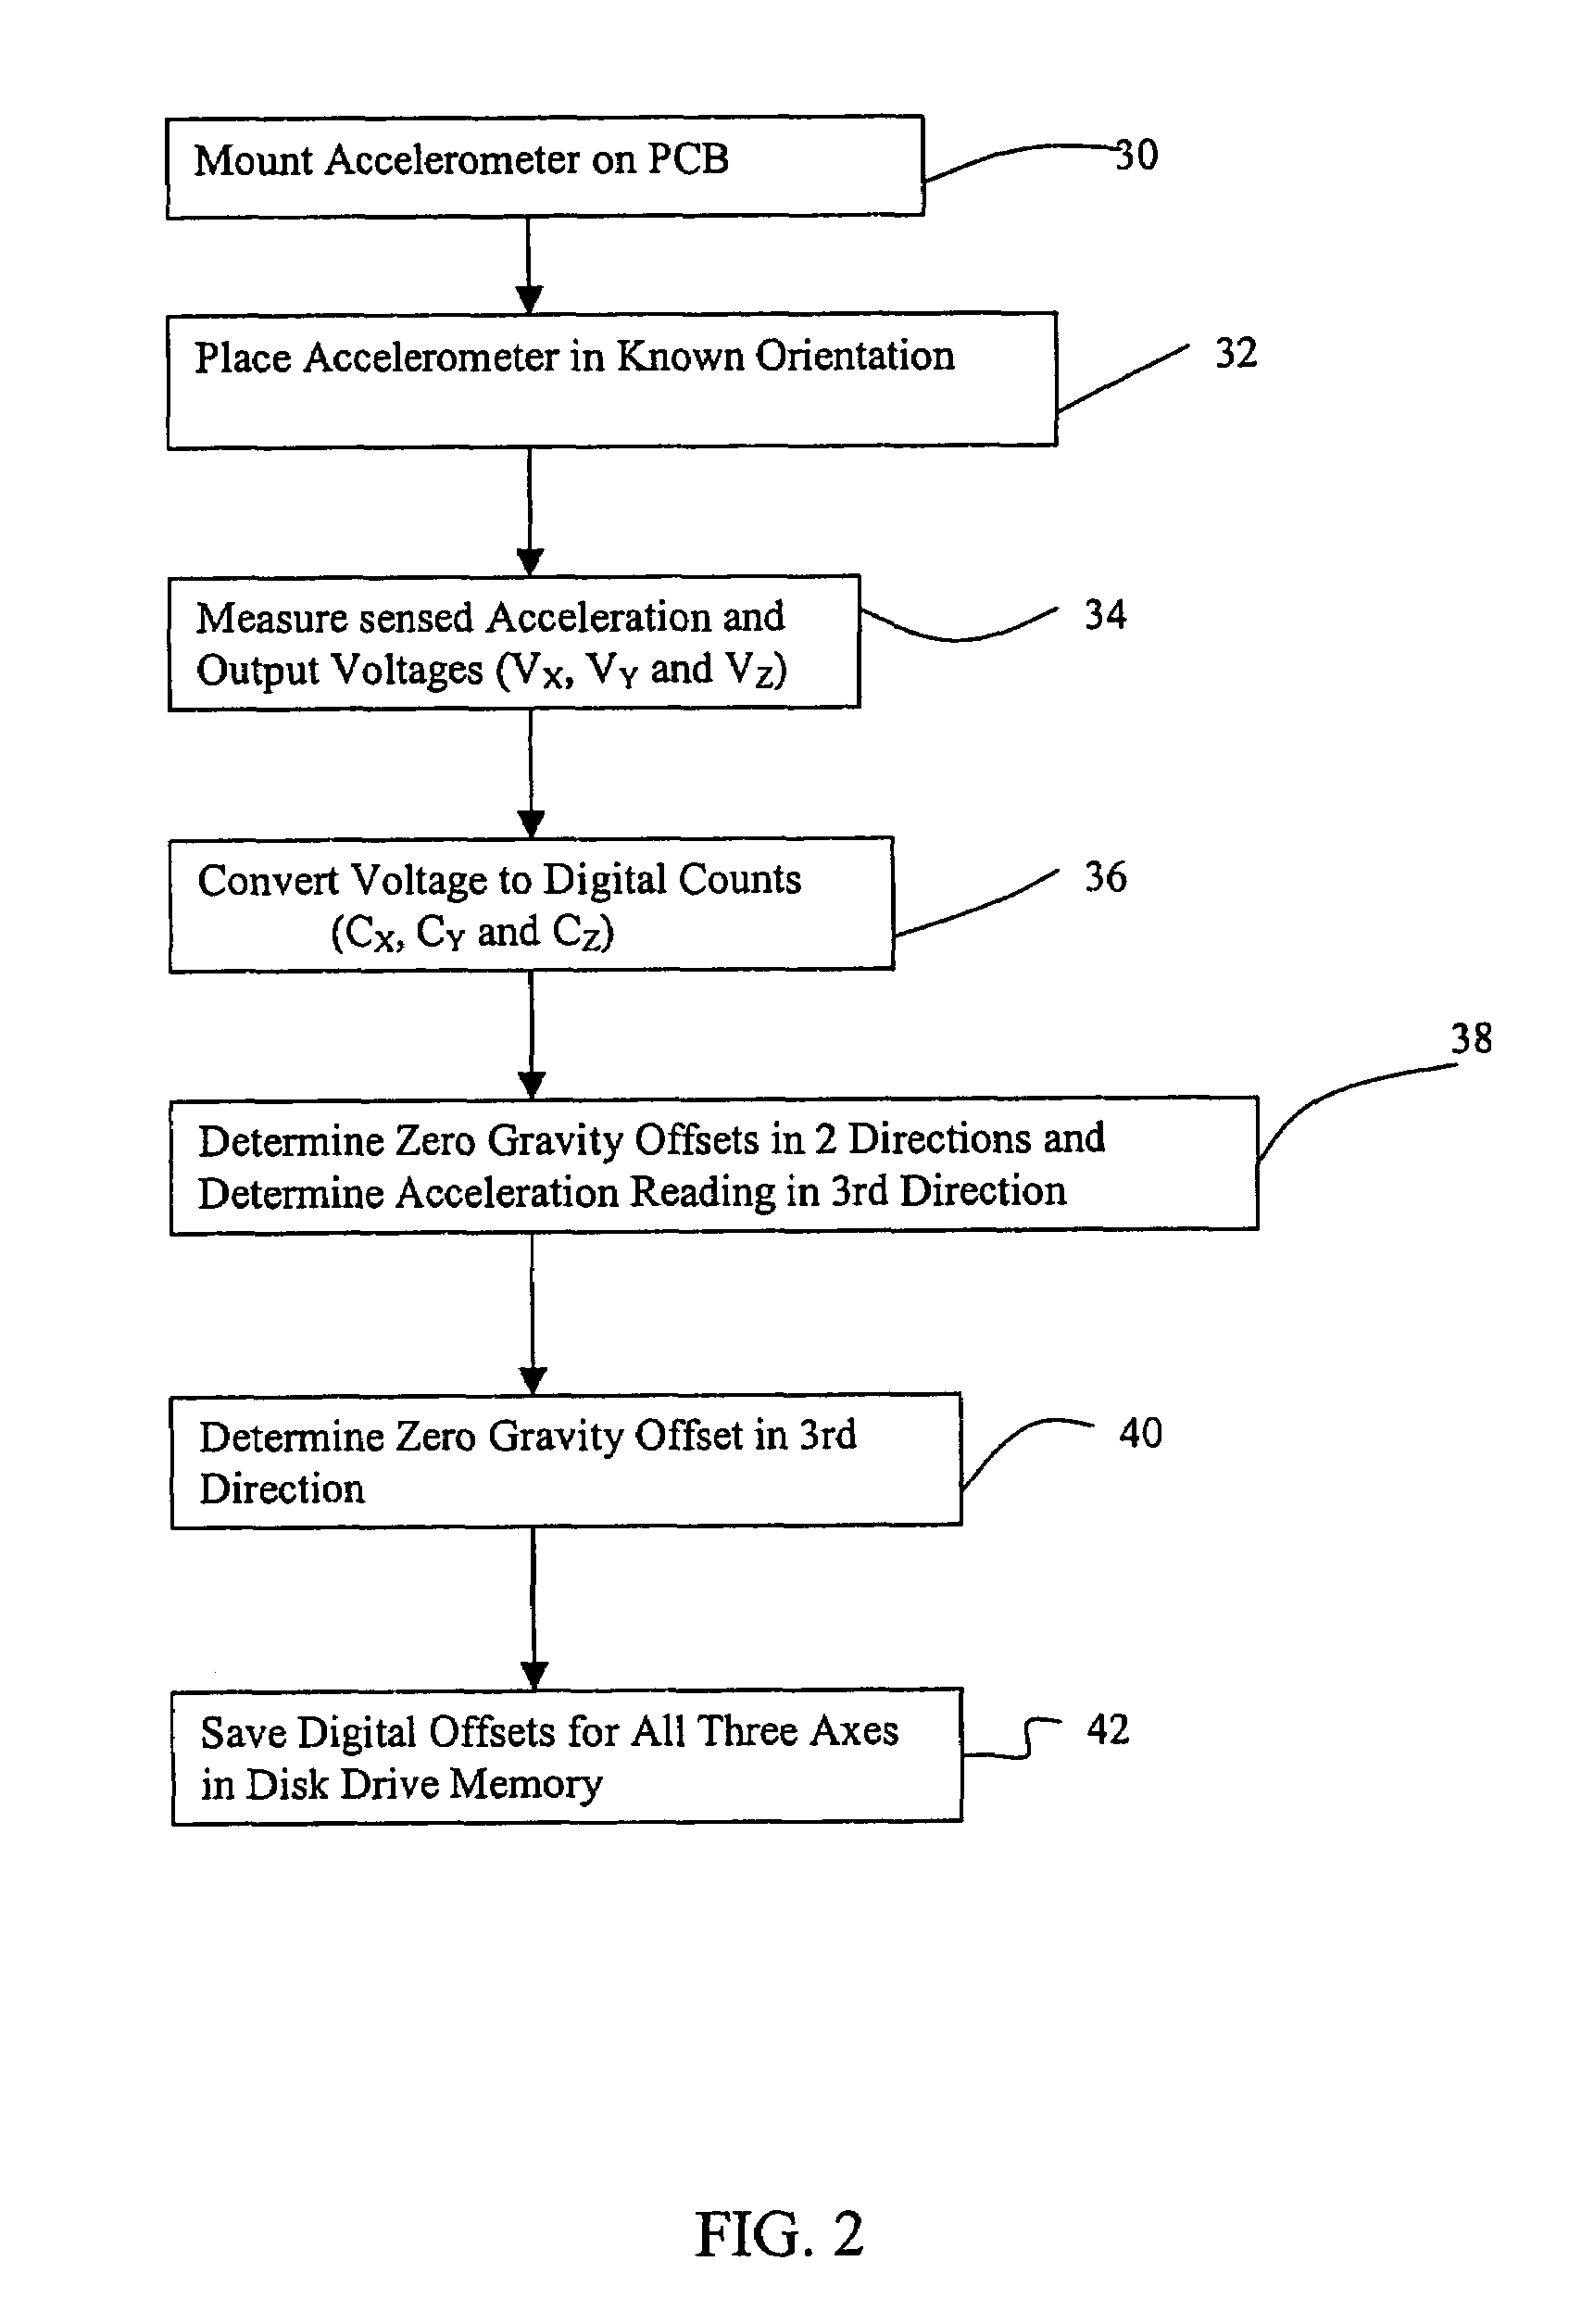 Zero-g offset identification of an accelerometer employed in a hard disk drive